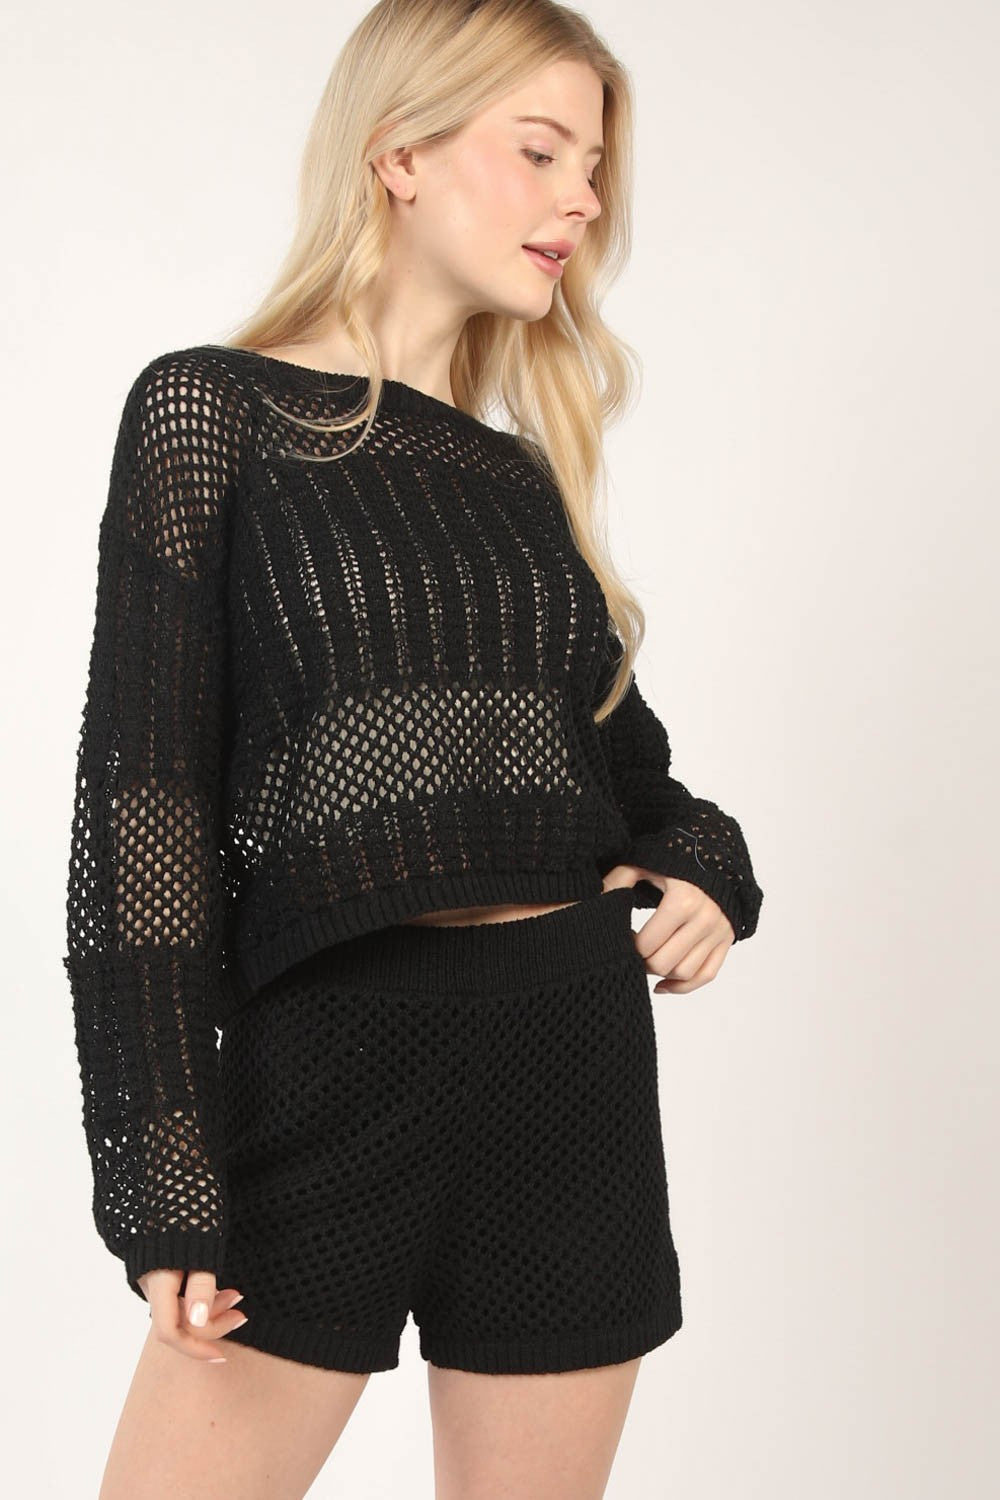 VERY J Openwork Cropped Cover Up and Shorts Set | us.meeeshop